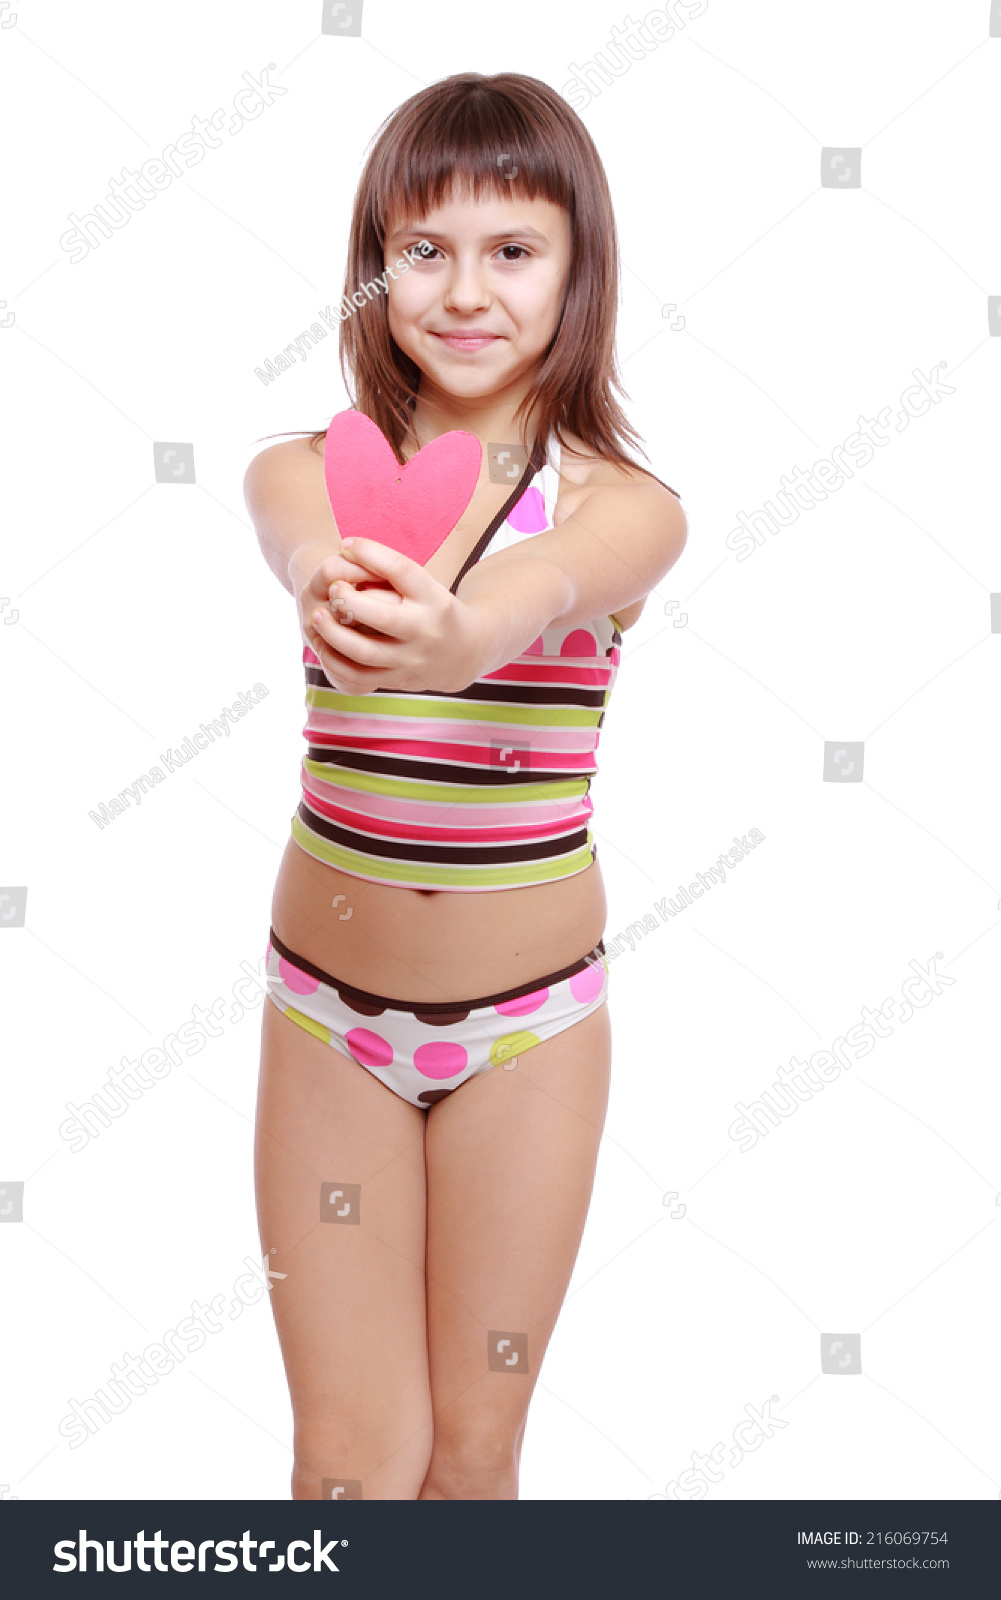 ls models preteen child little girl Little Girl 1013 Years Old Stock Photo (Edit Now) 76976797